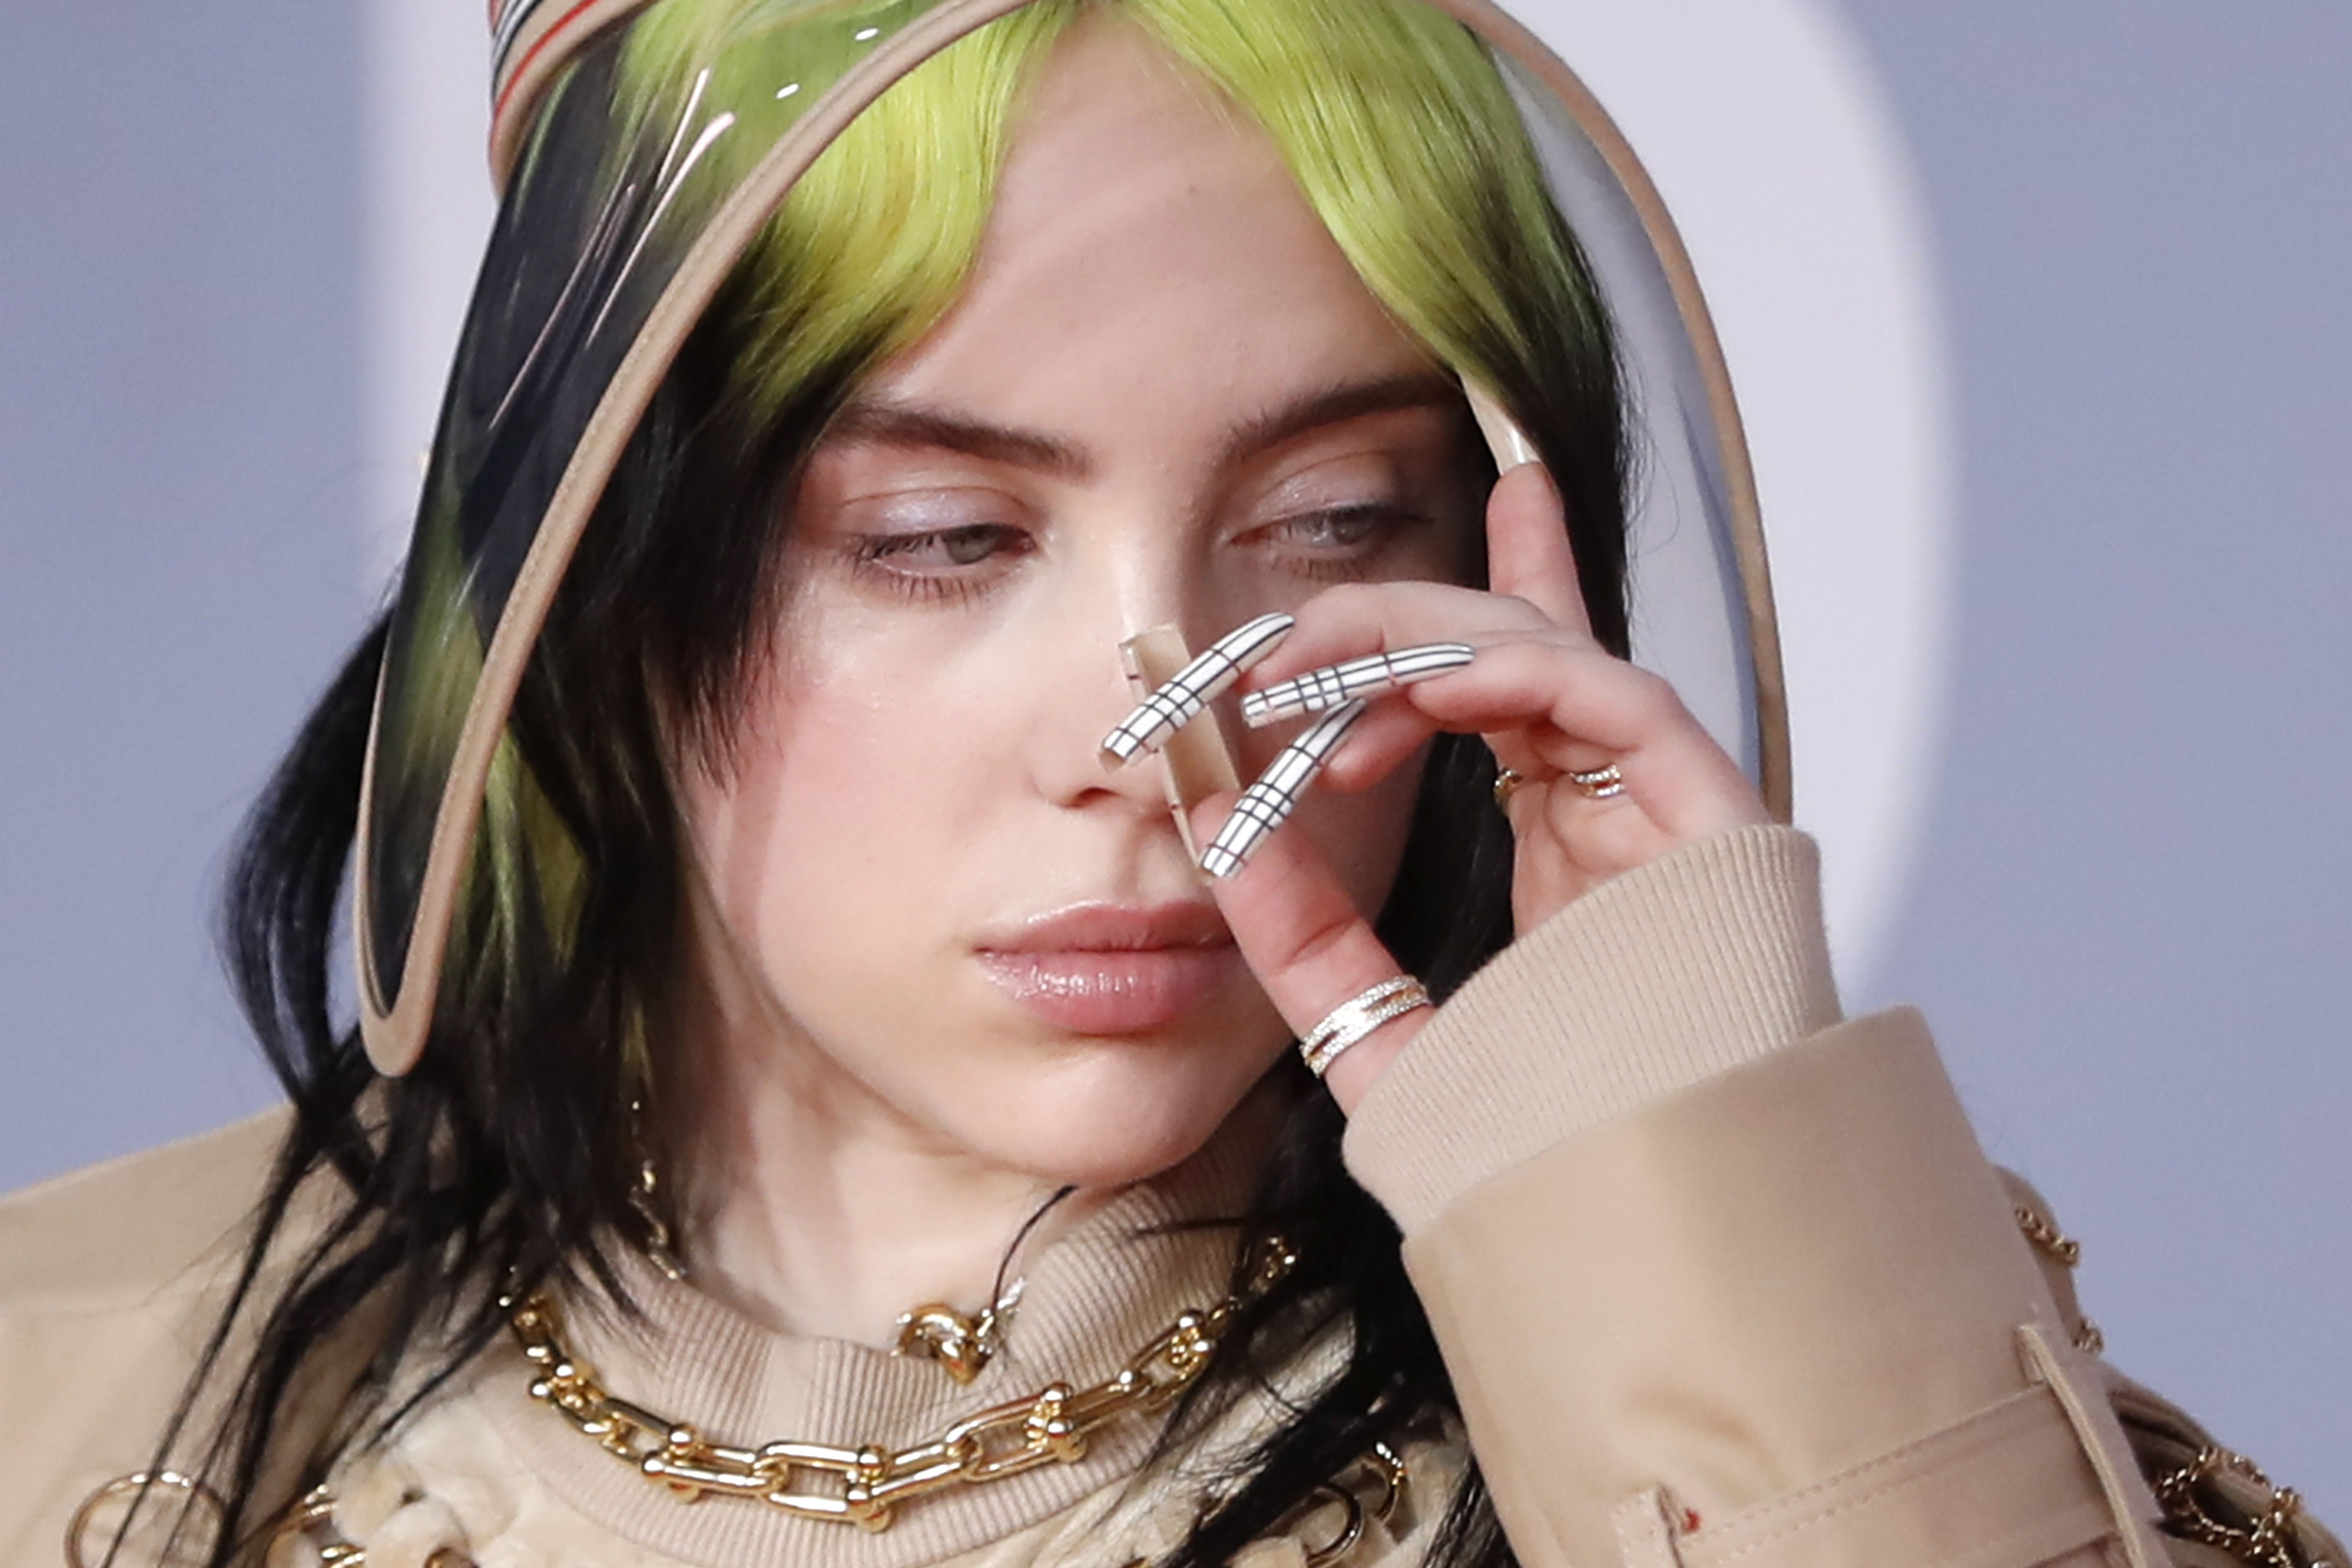 2. "How to Create Billie Eilish Nails" - wide 10